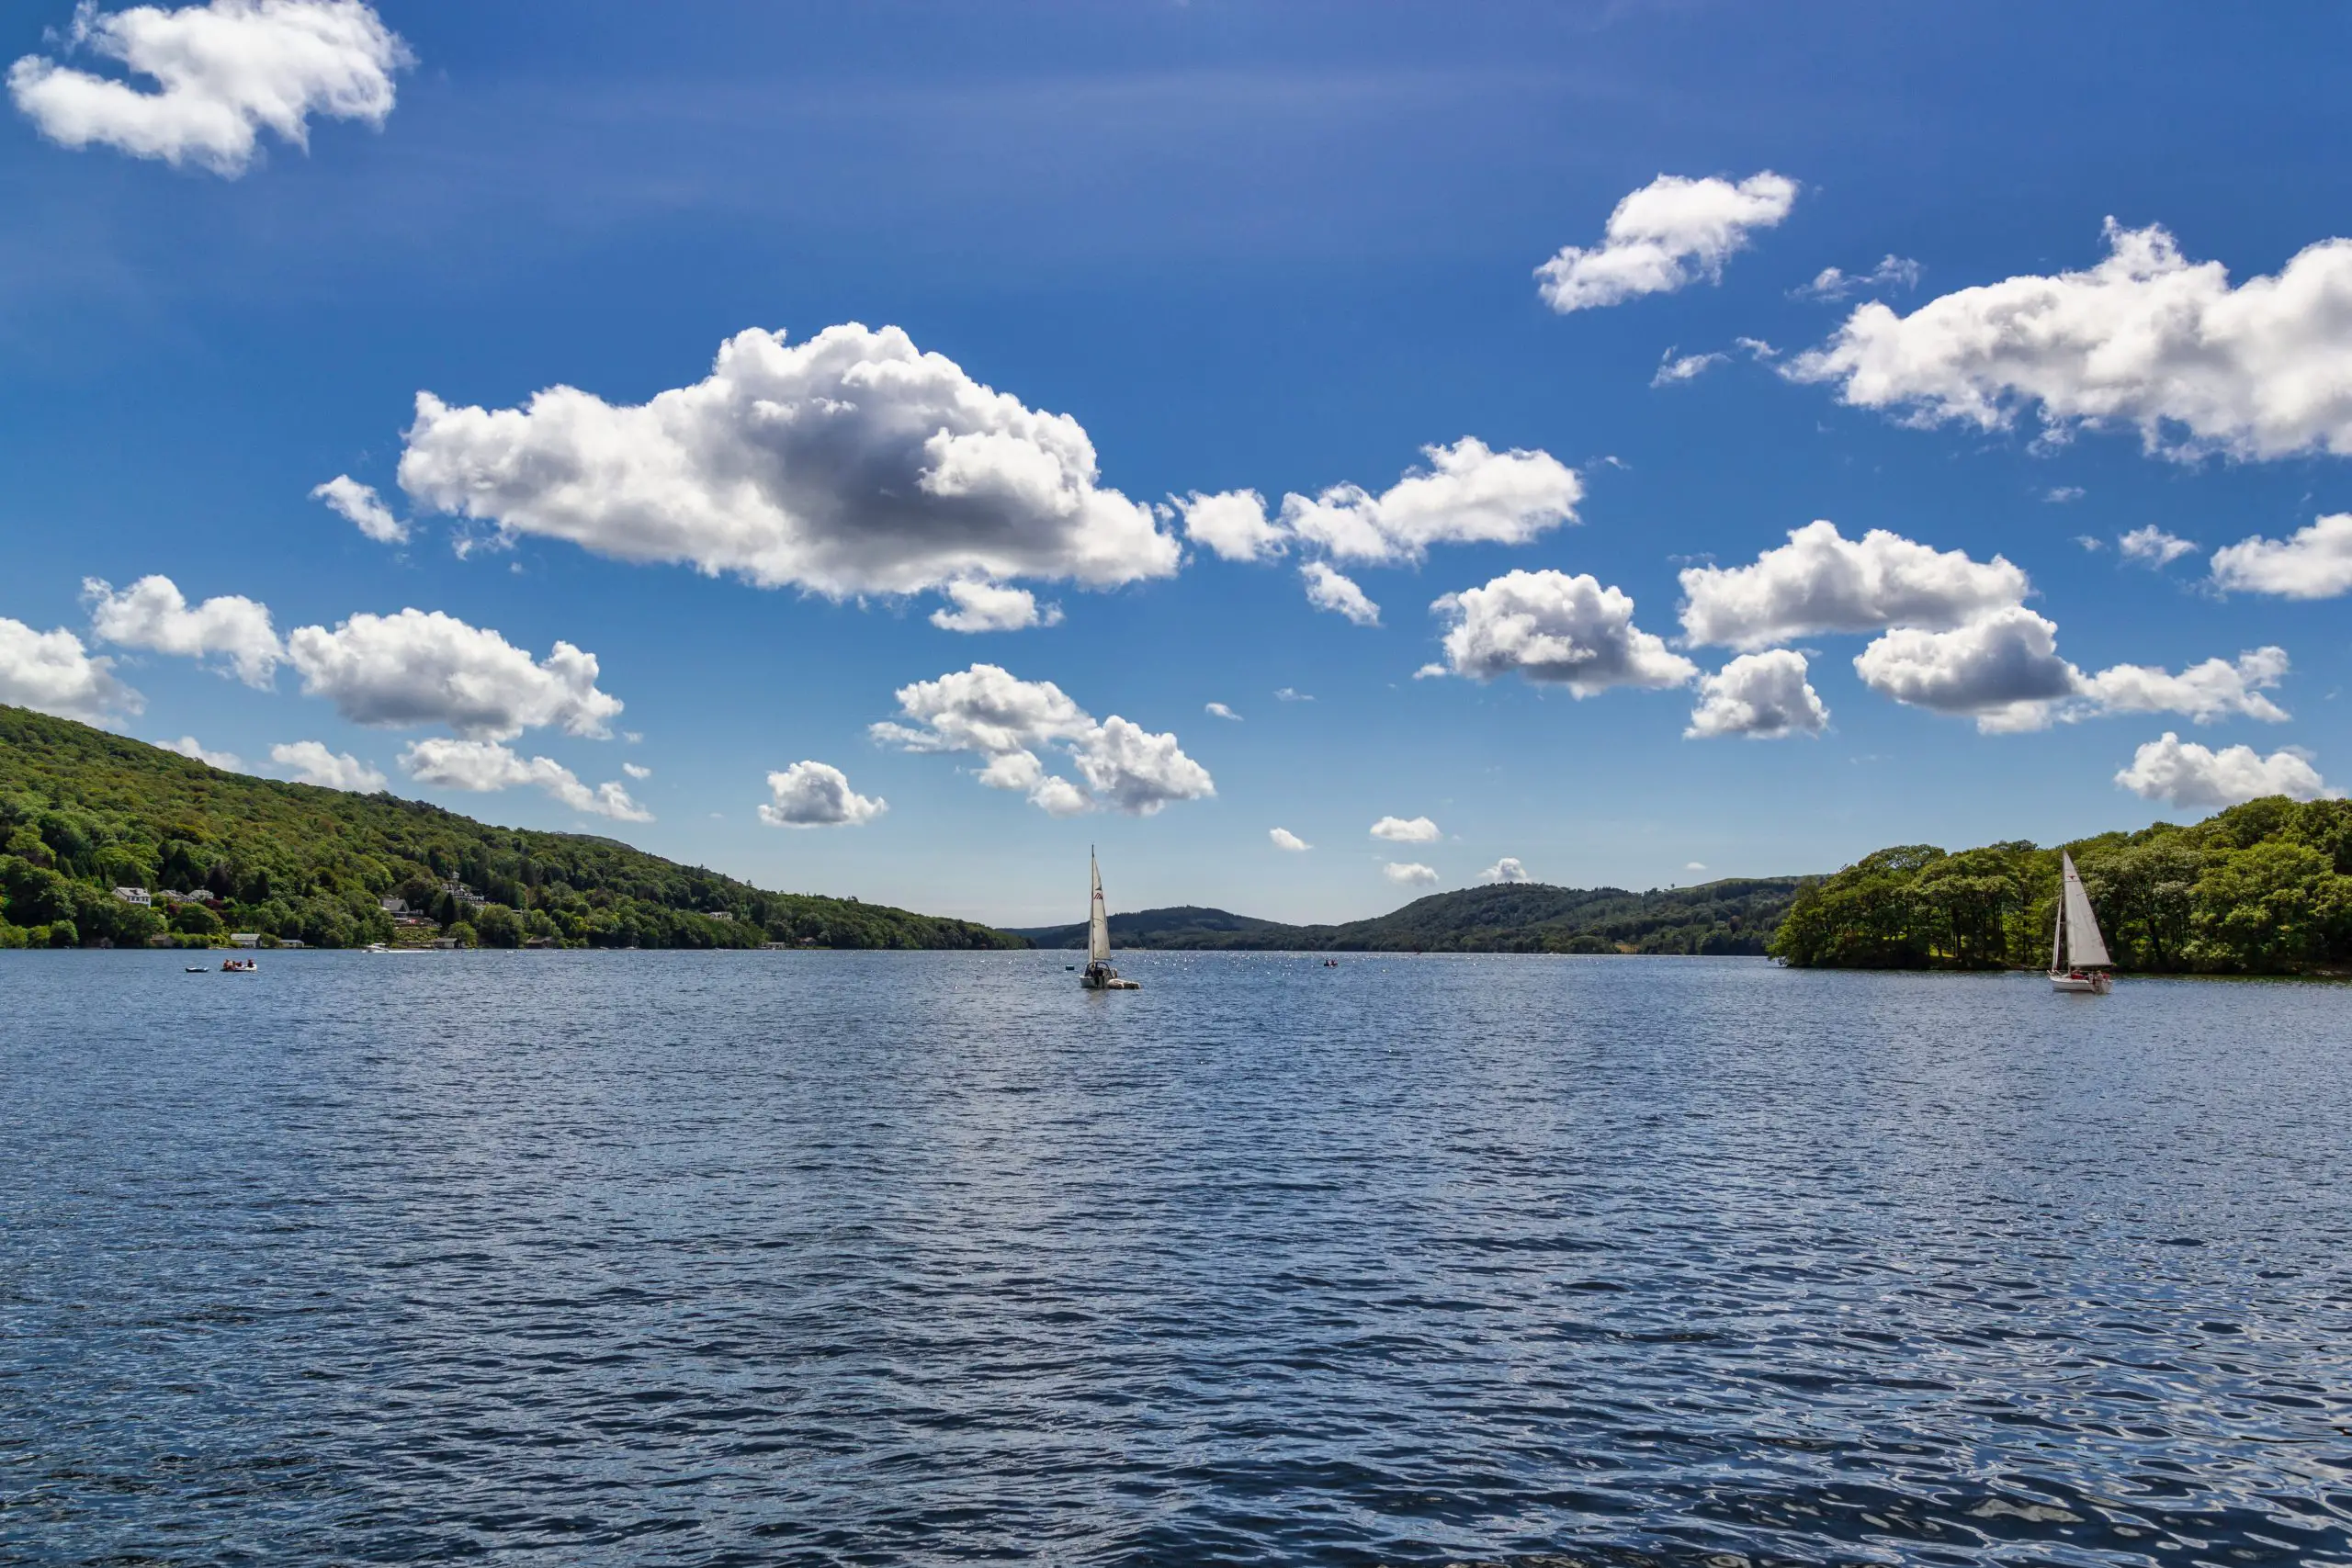 Boats in the Windermere lake with little fluffy clouds above